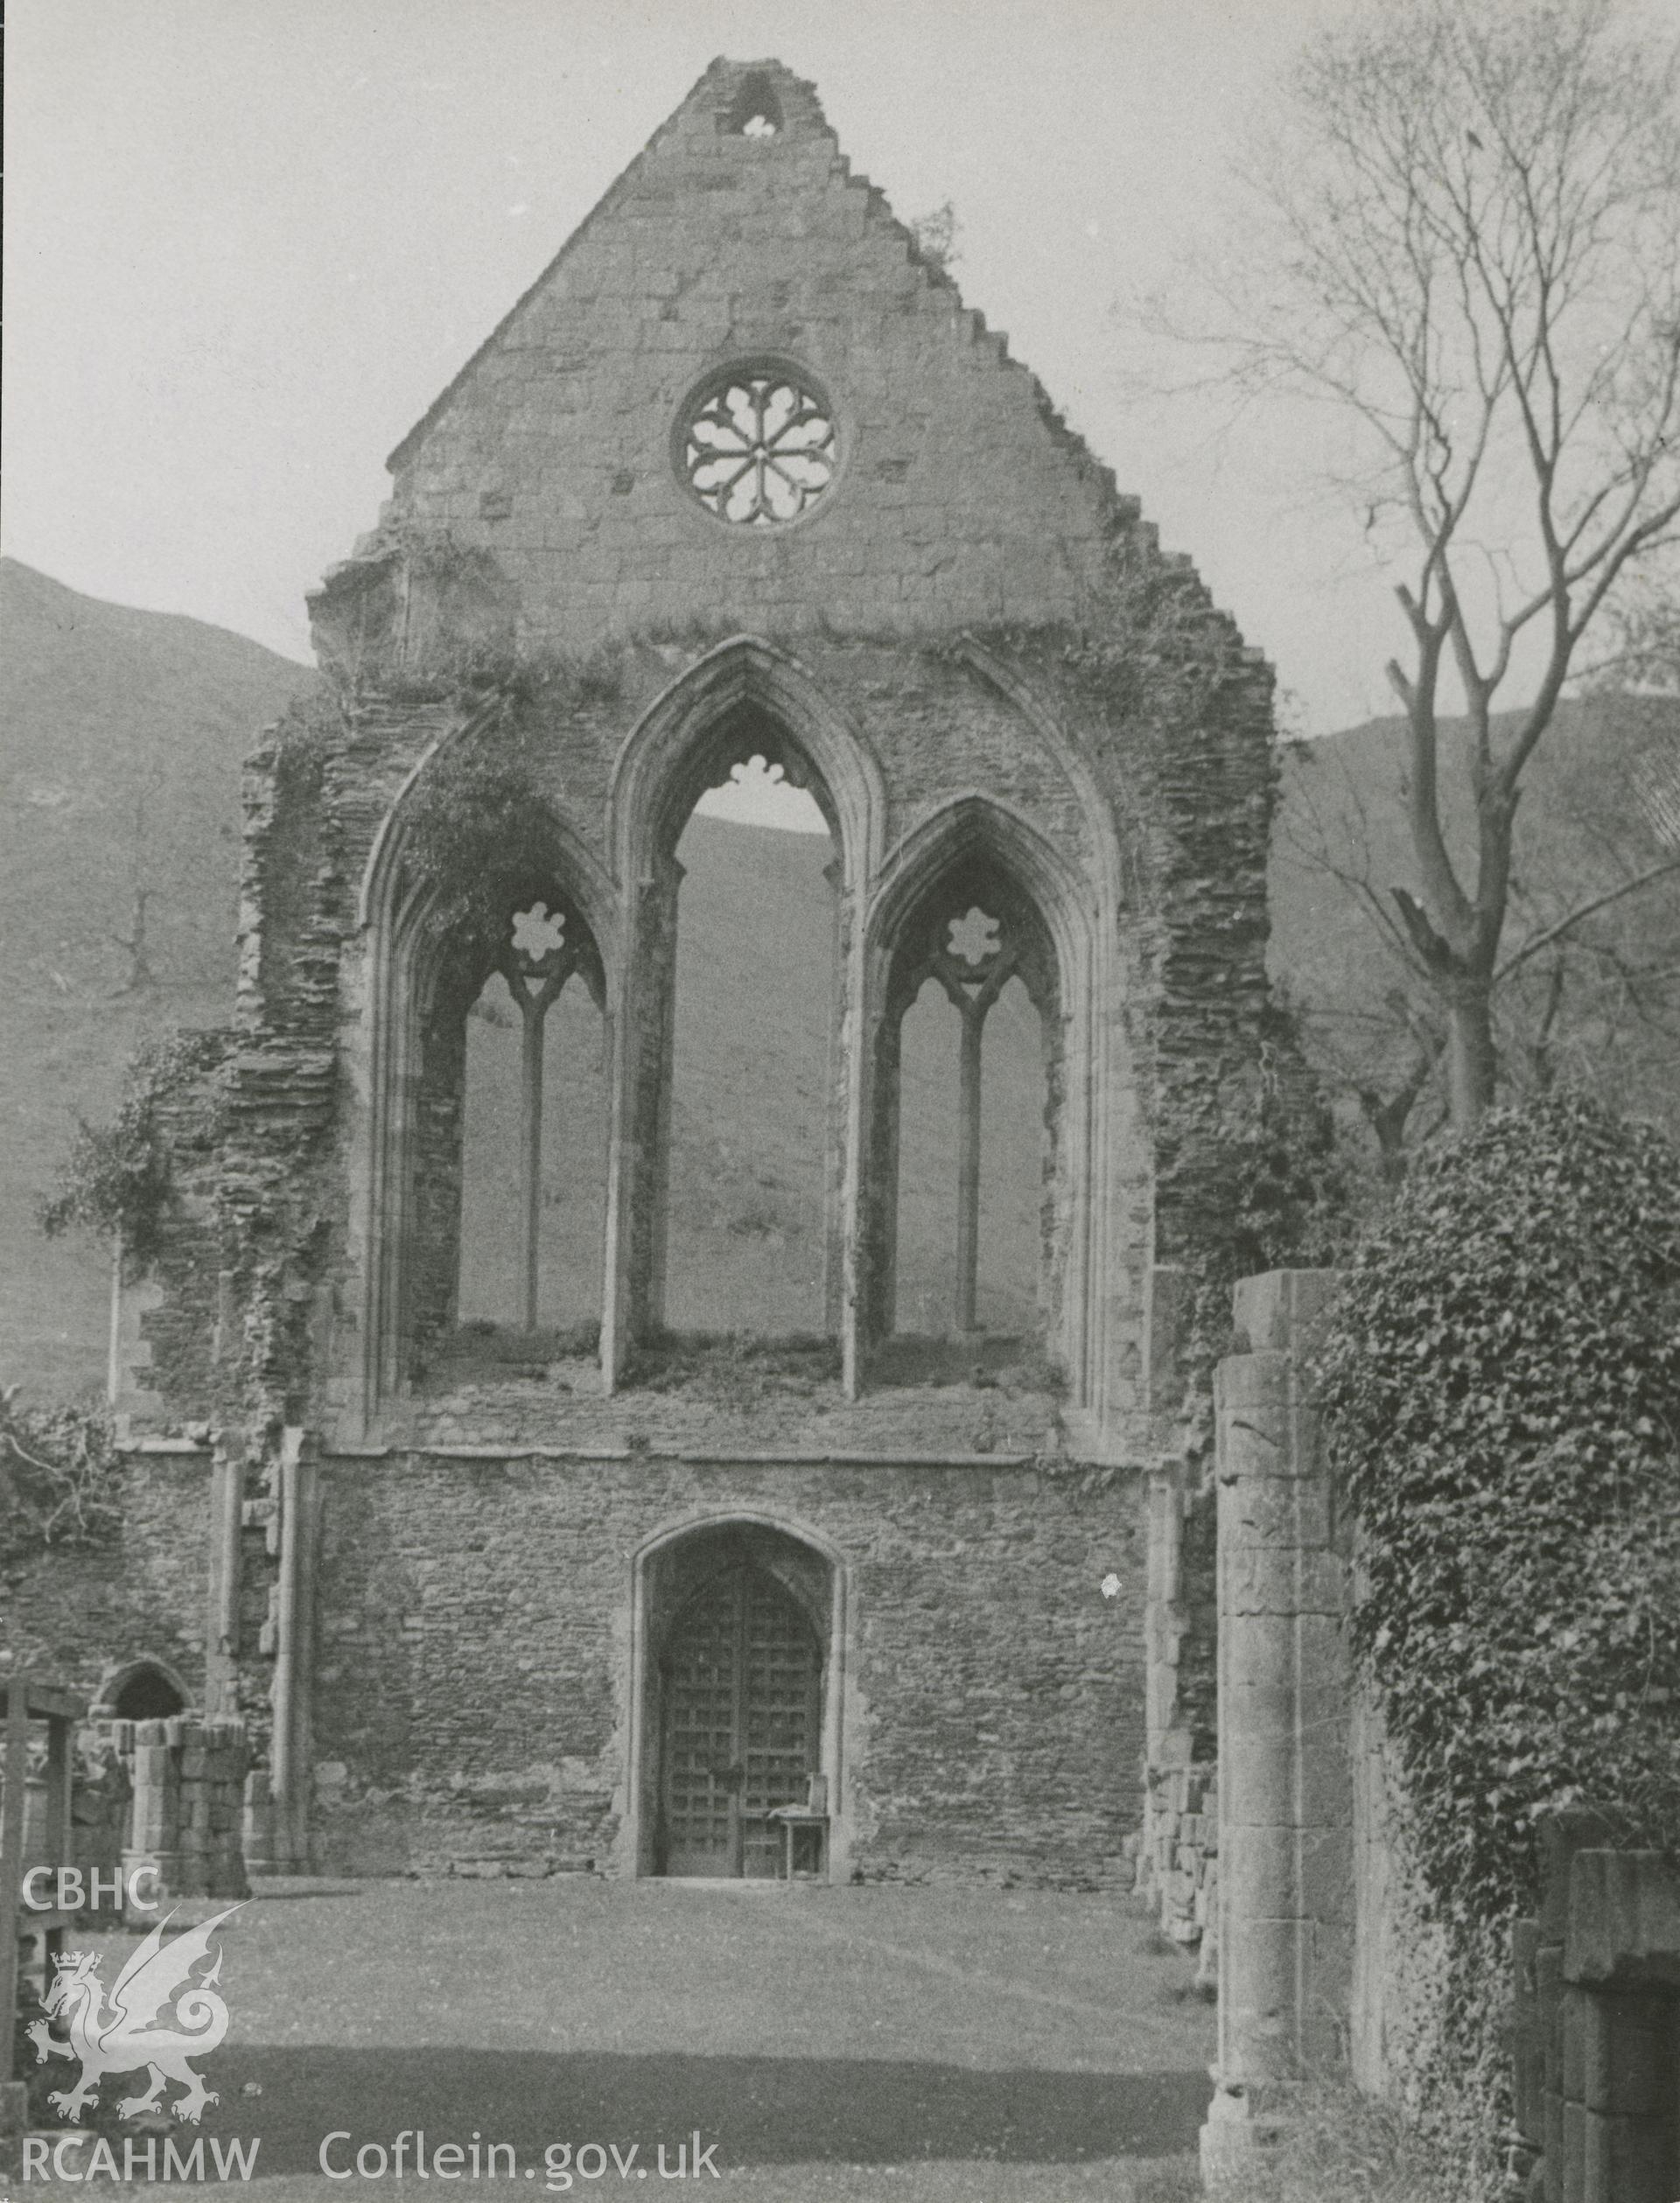 A black and white print showing the Valle Crucis Abbey, near Llangollen.